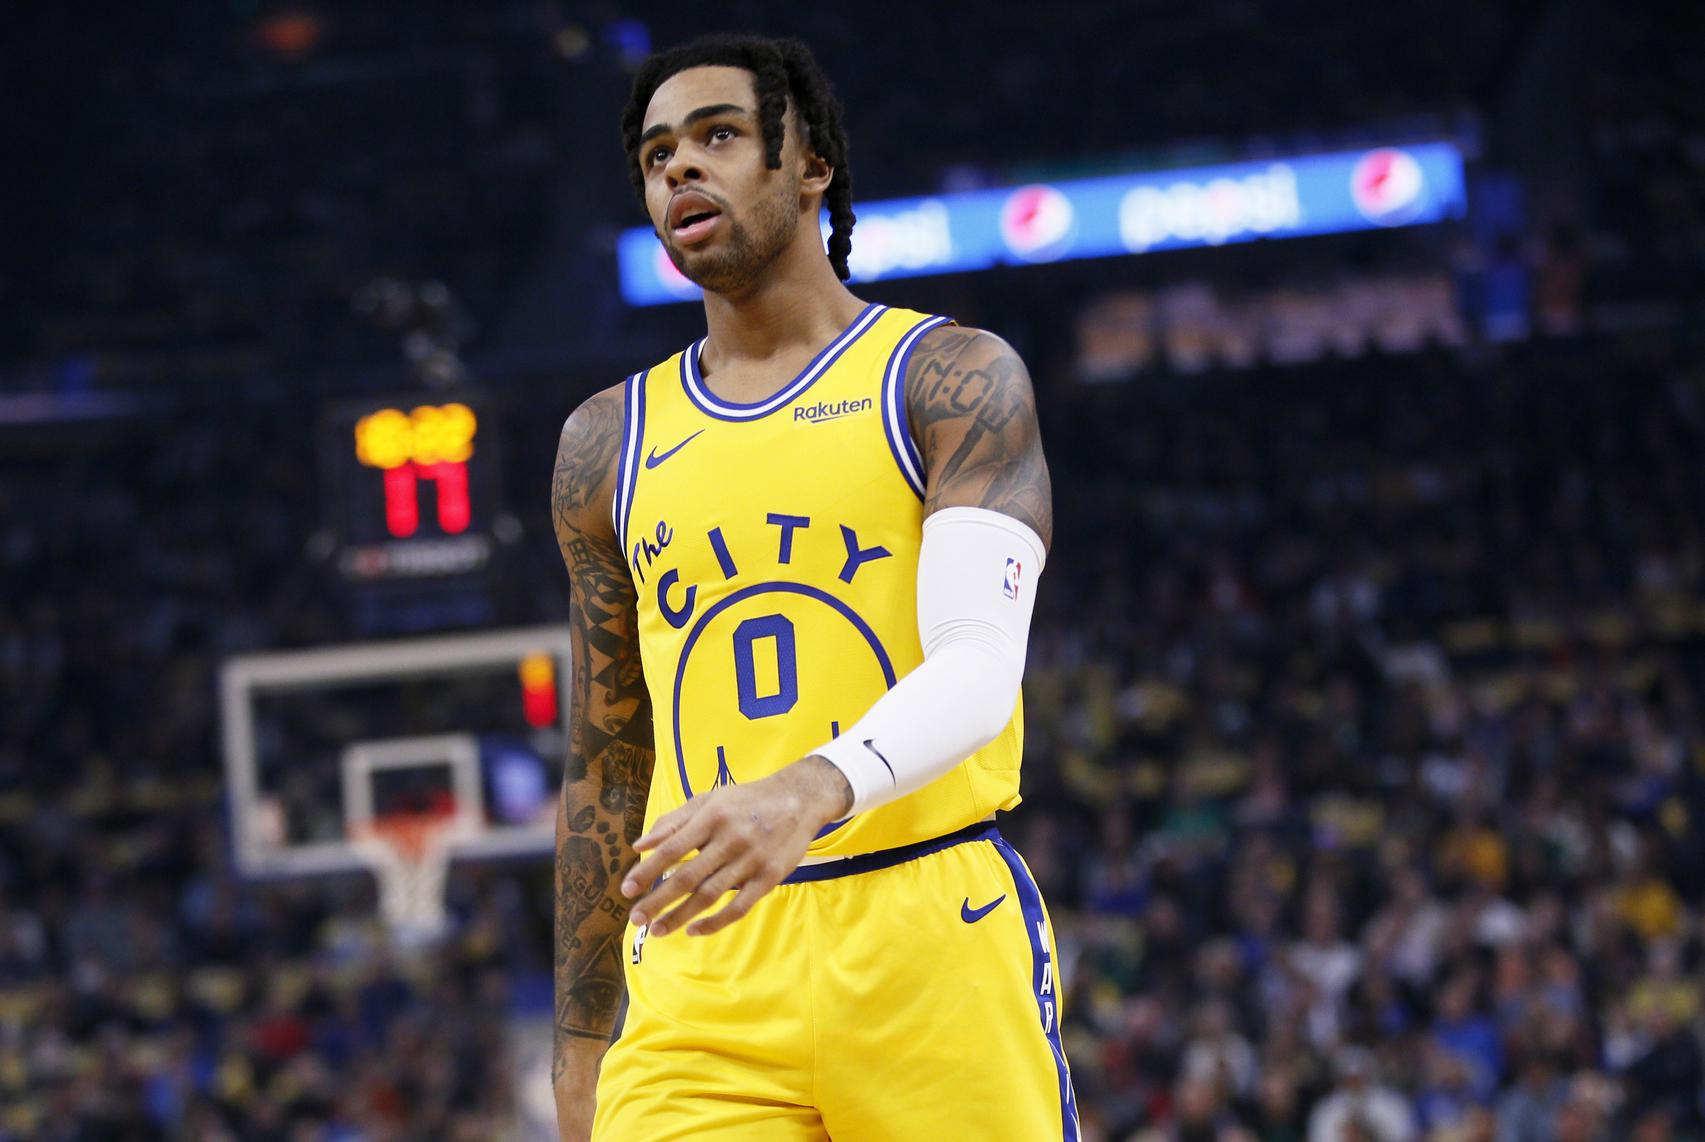 Report: Warriors acquiring D'Angelo Russell in sign-and-trade with Nets